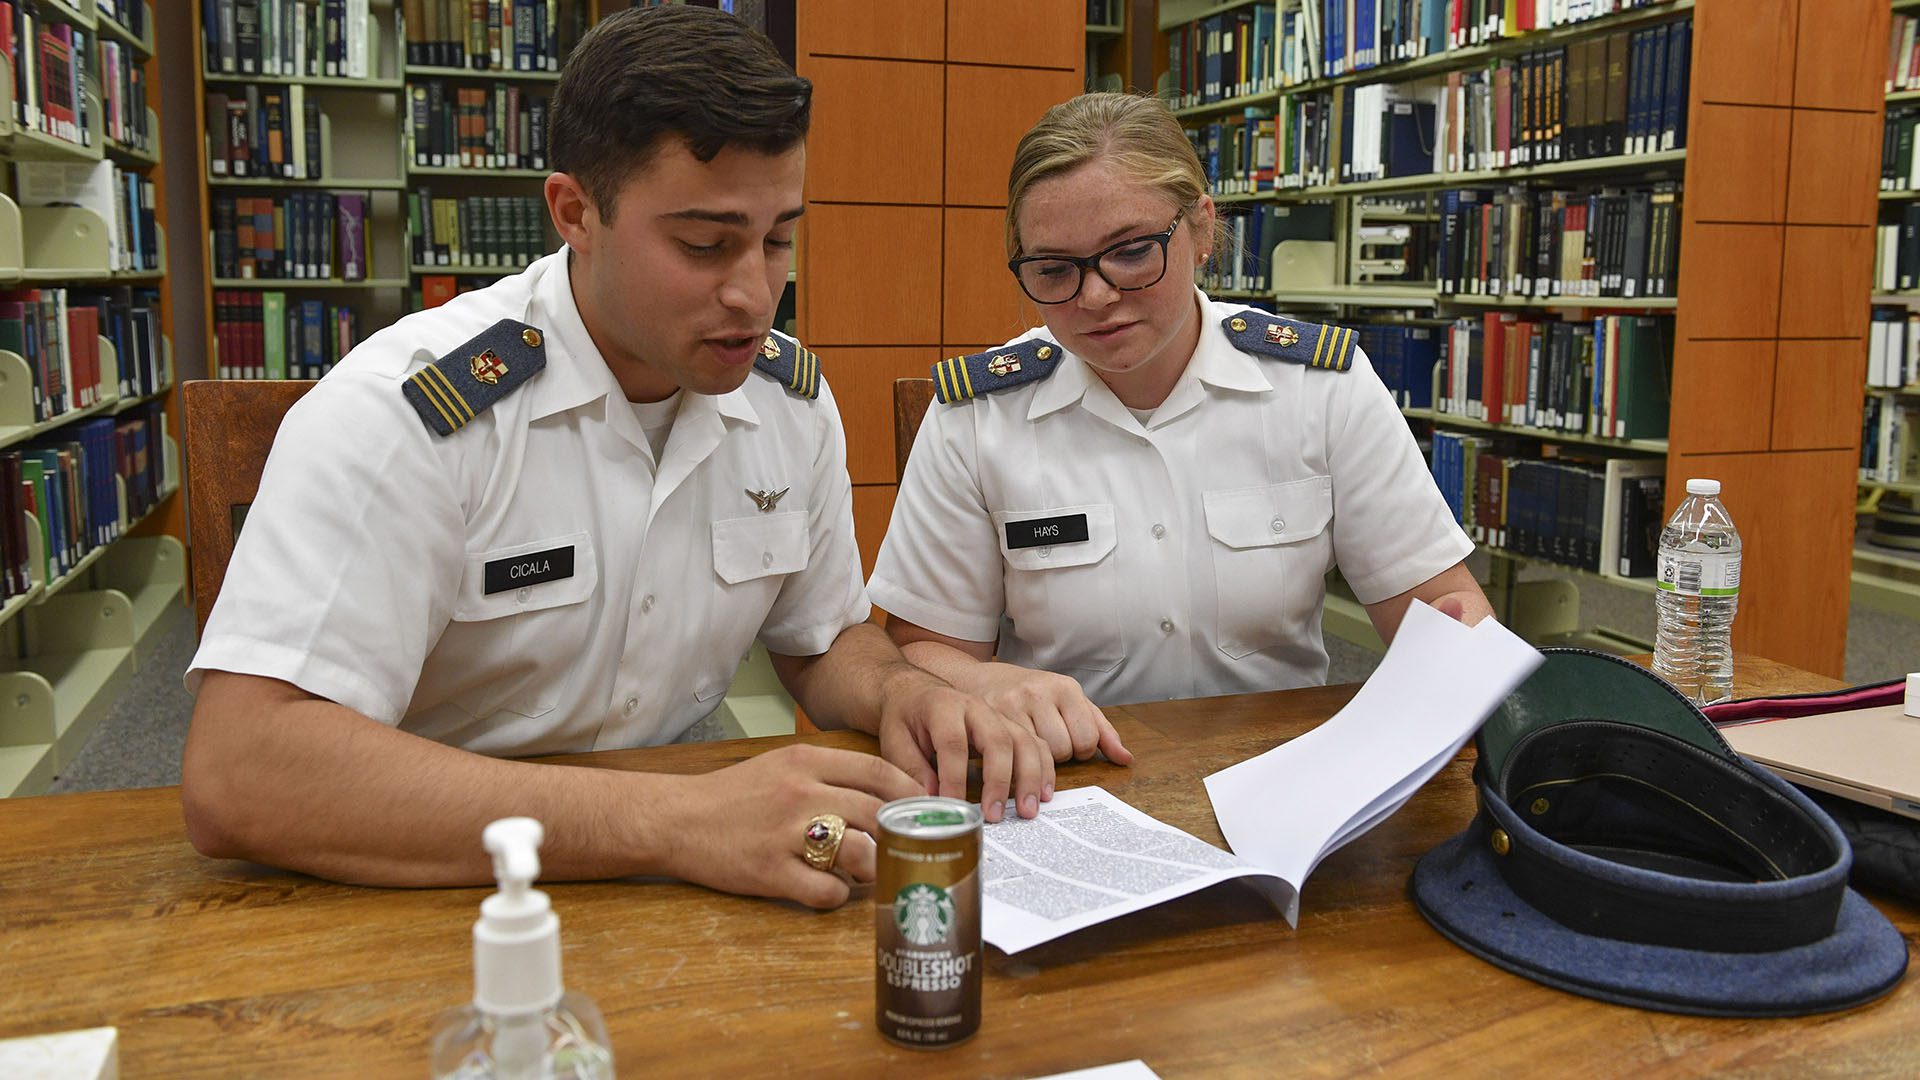 two cadets seated at table looking at papers